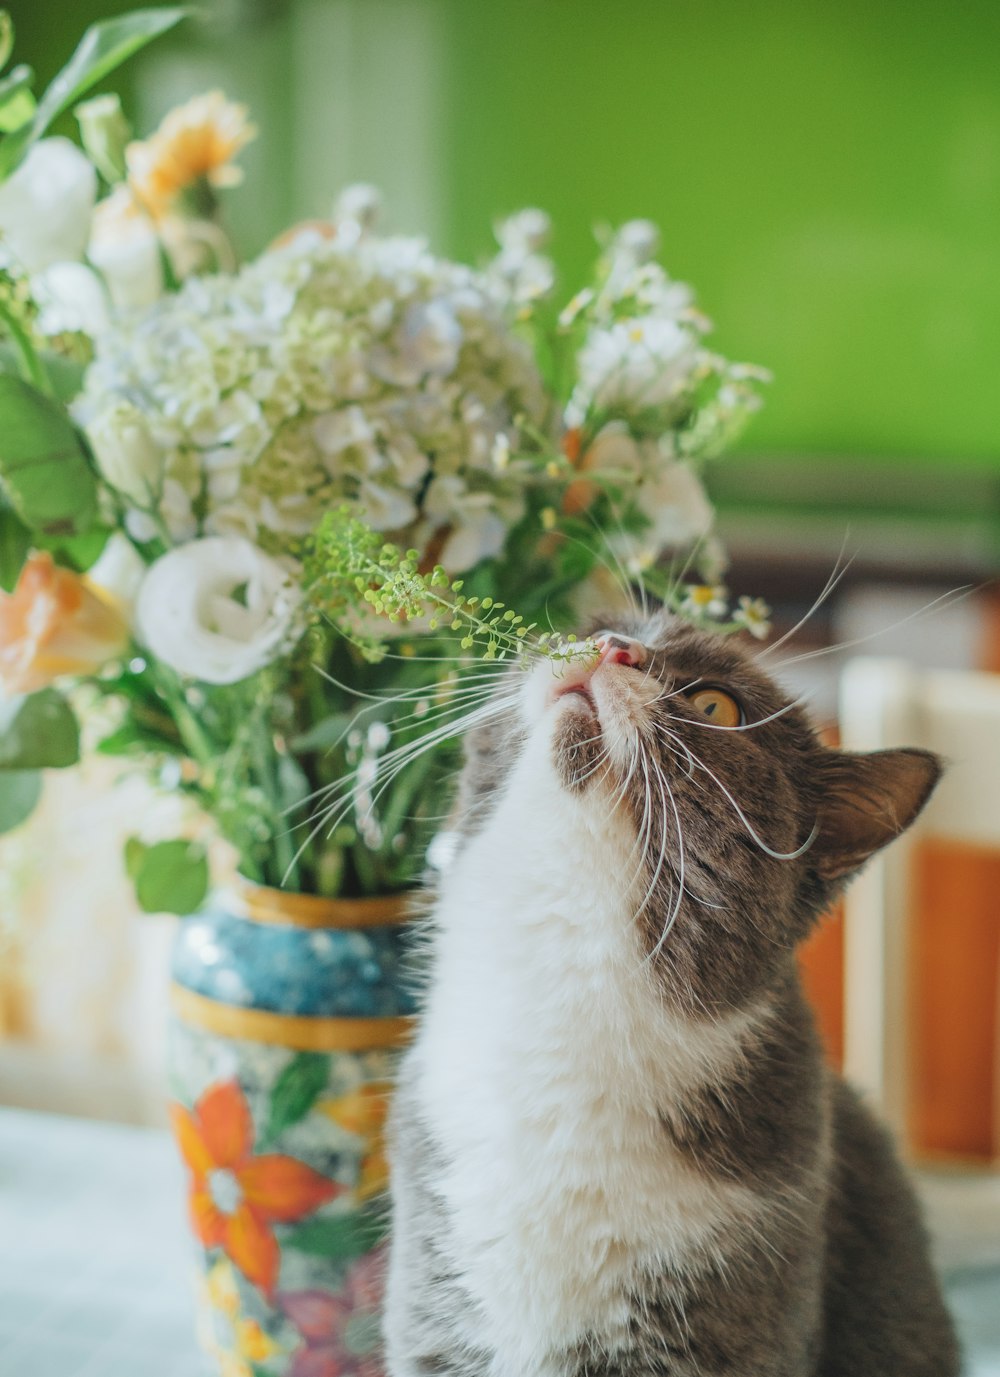 a gray and white cat sitting next to a vase filled with flowers